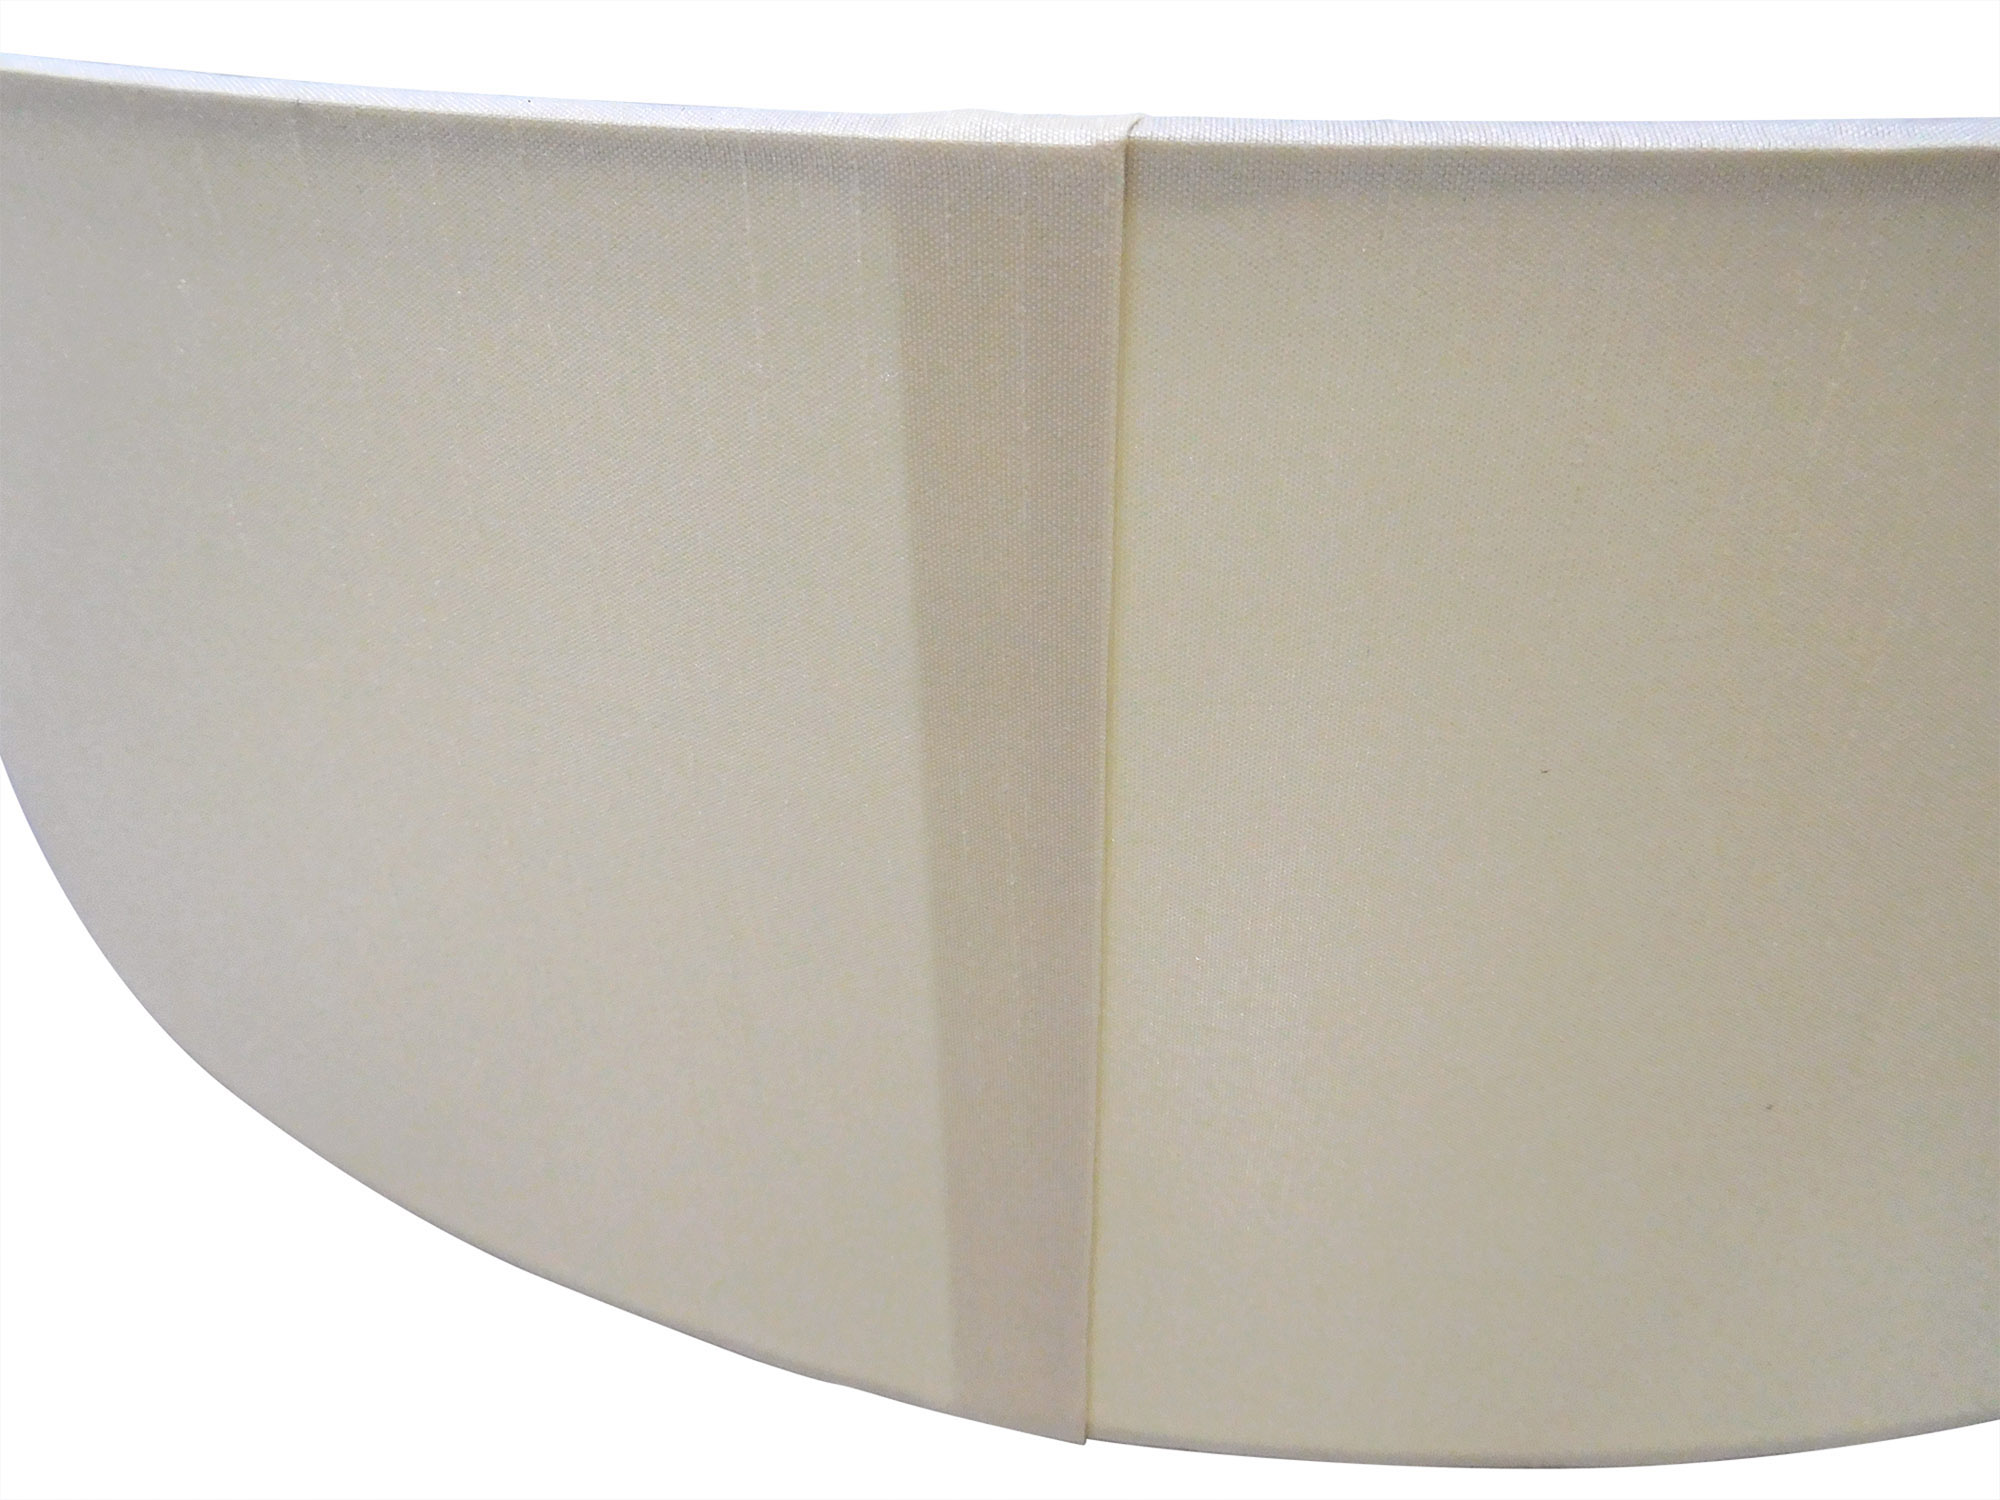 Baymont 40cm Flush 3 Light Ivory Pearl; Frosted Diffuser DK0610  Deco Baymont WH IV